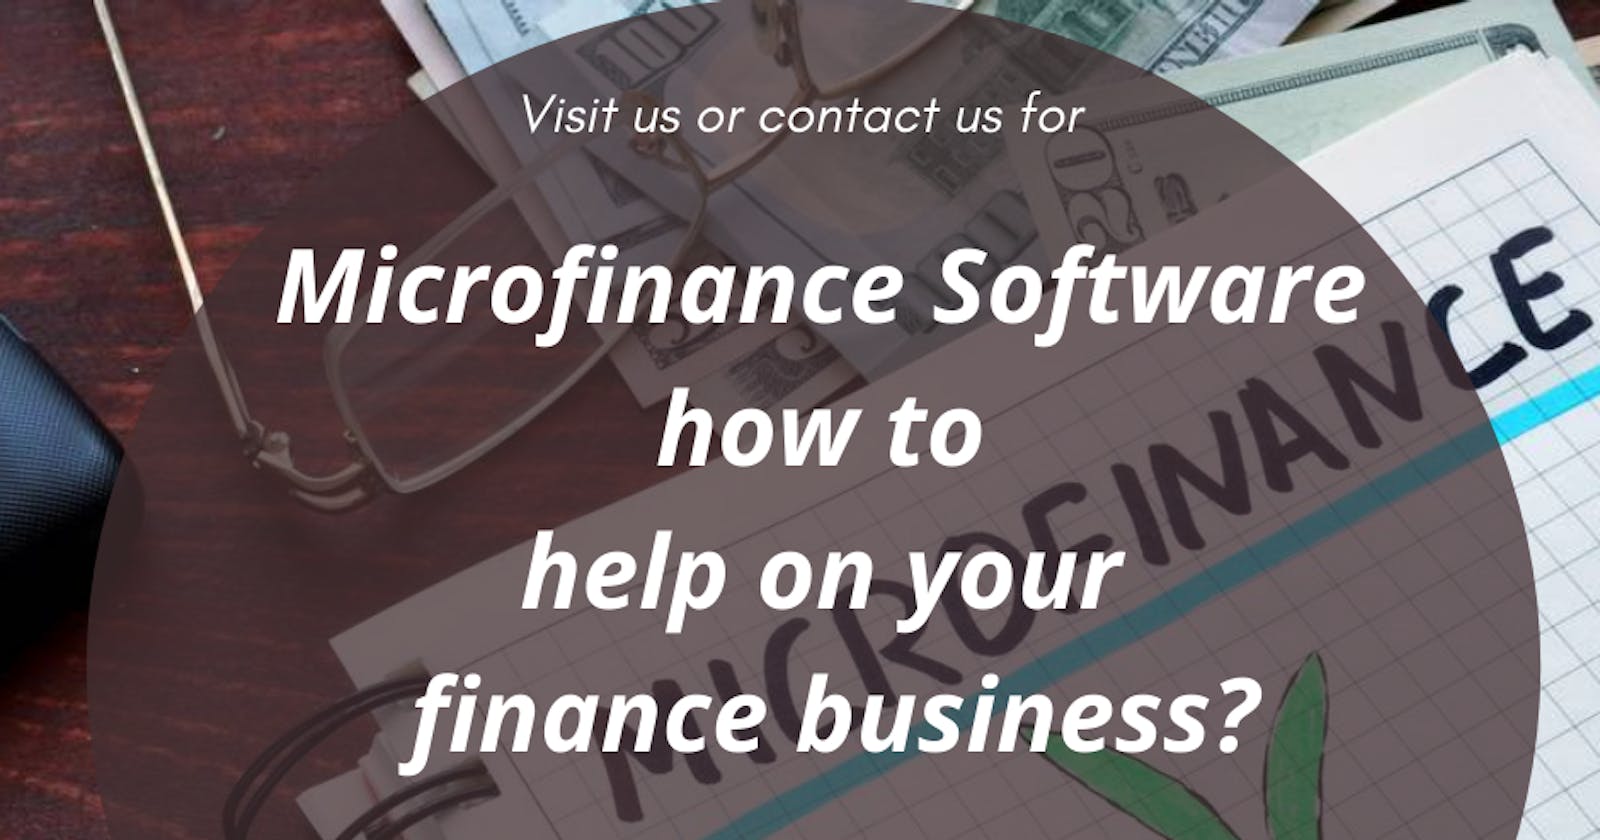 How Microfinance Software can help the finance business?